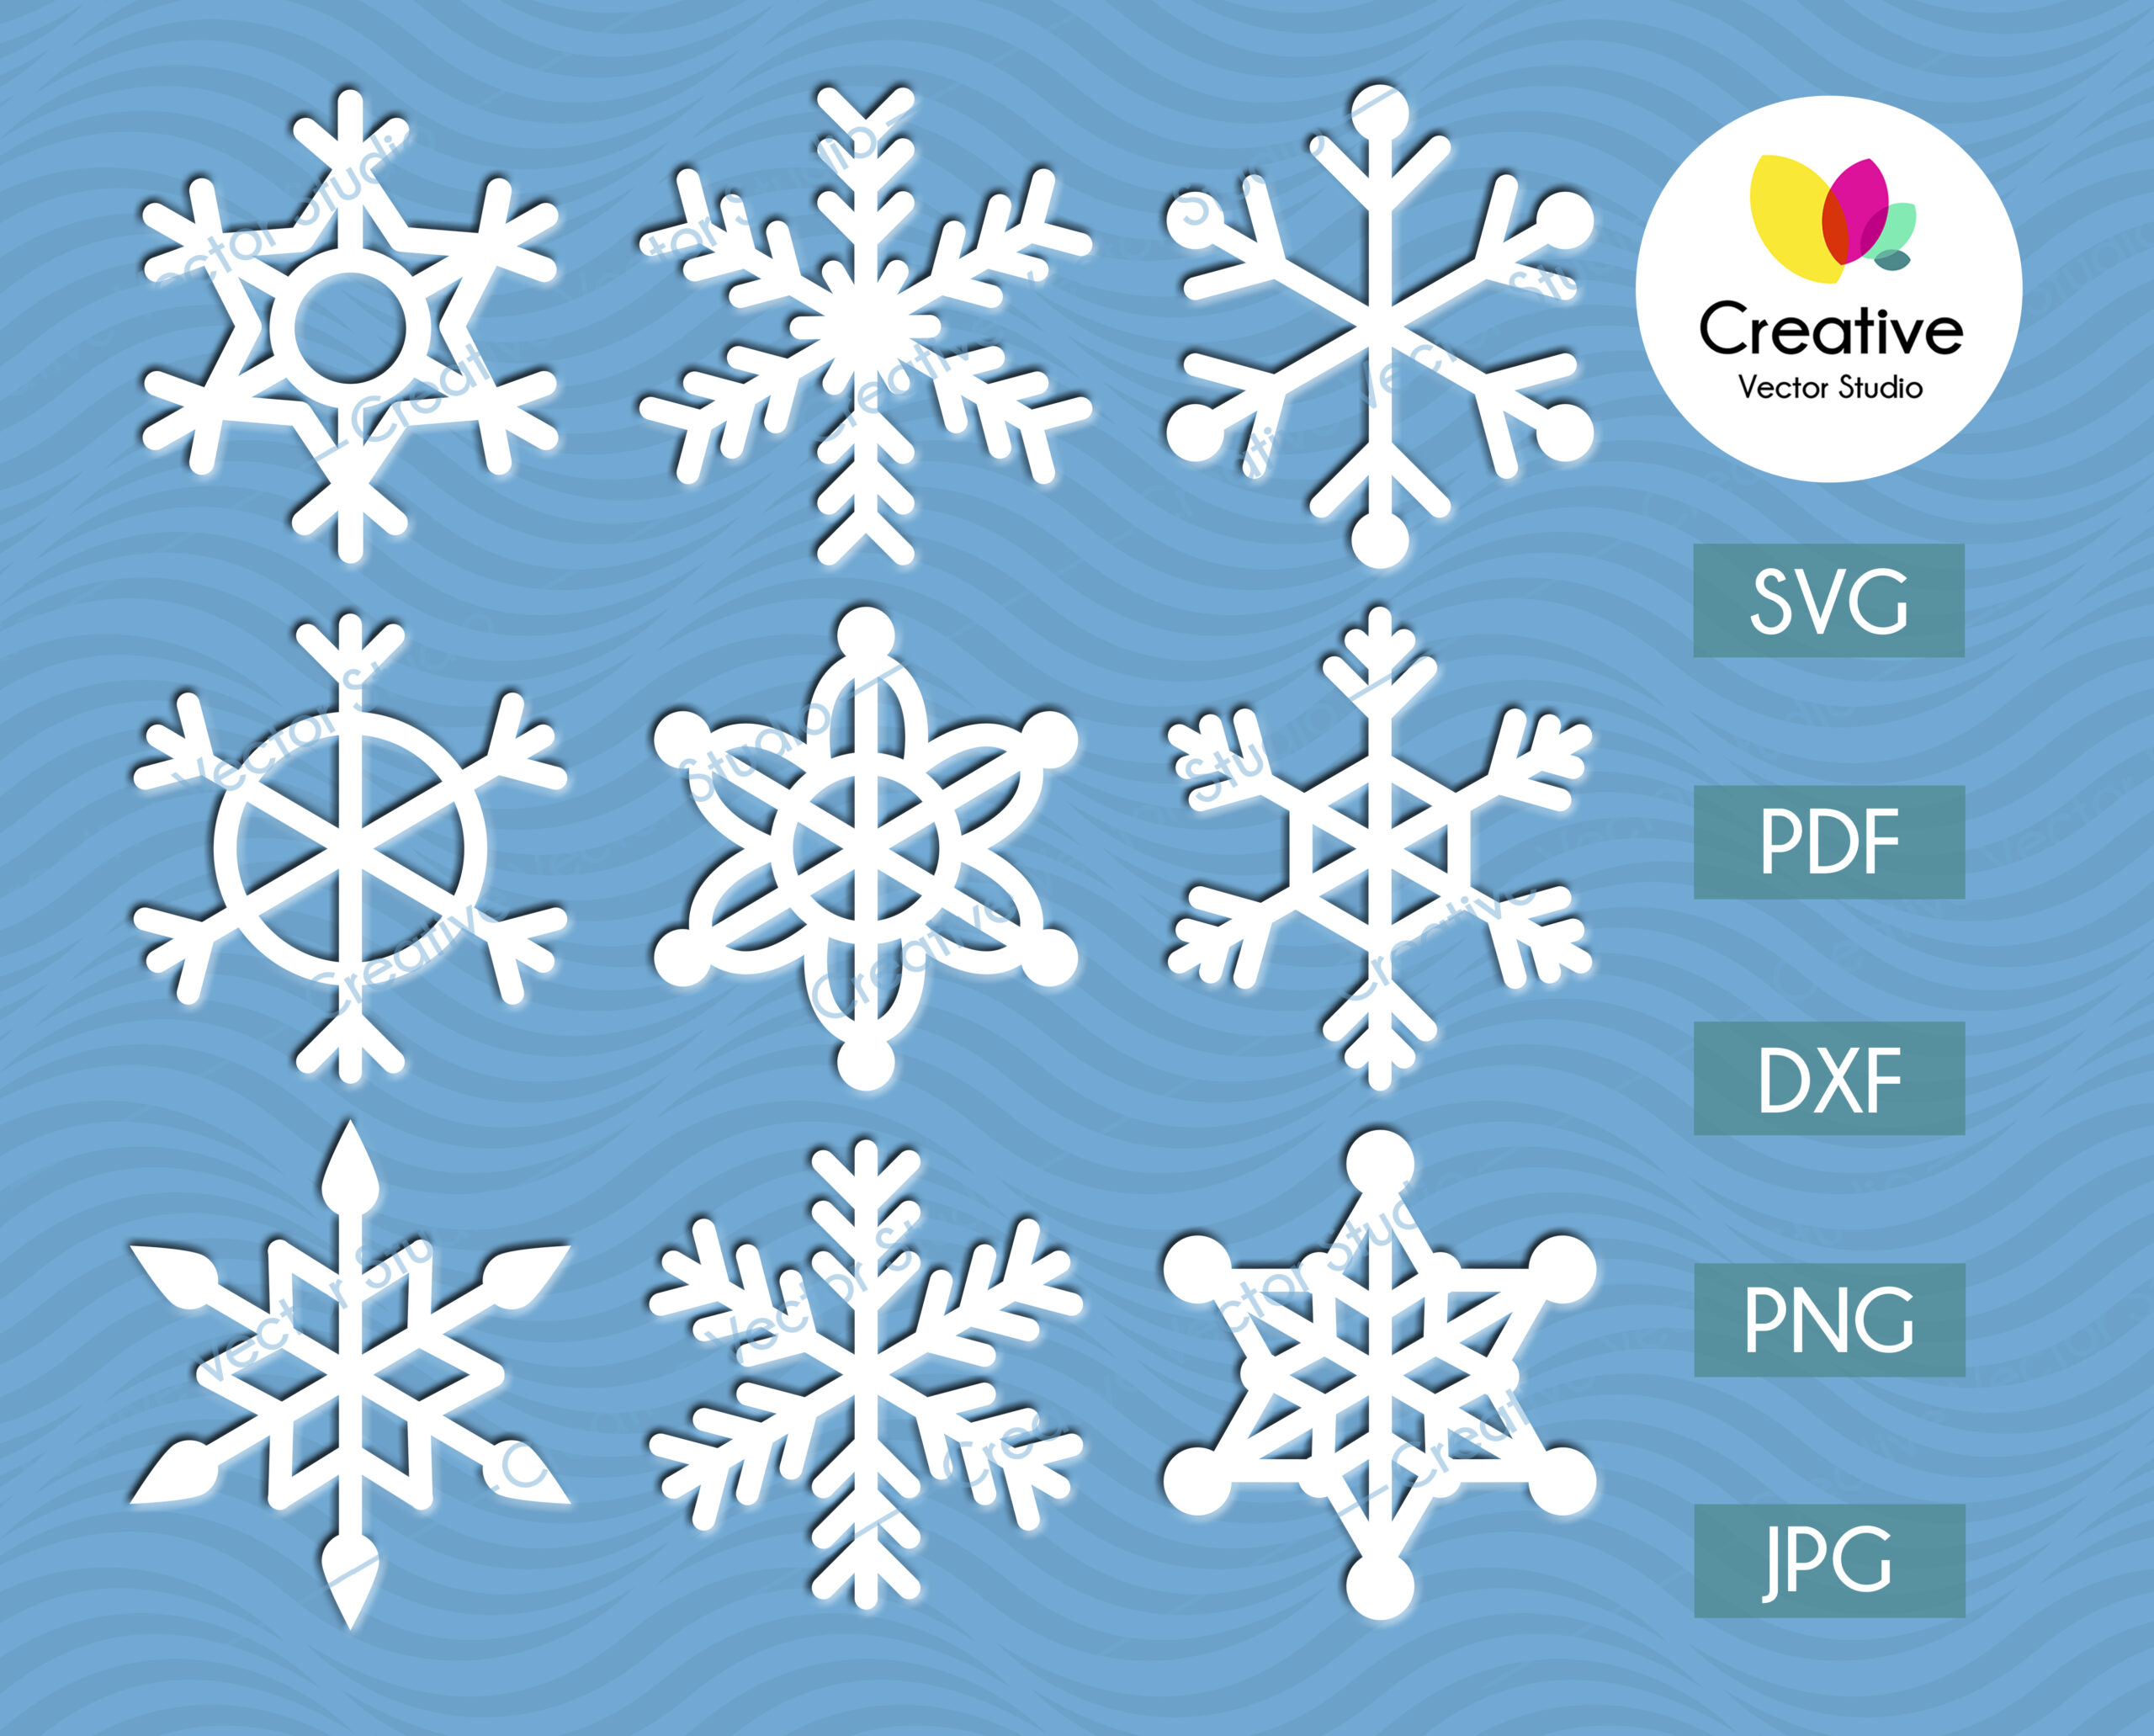 simple snowflakes clipart